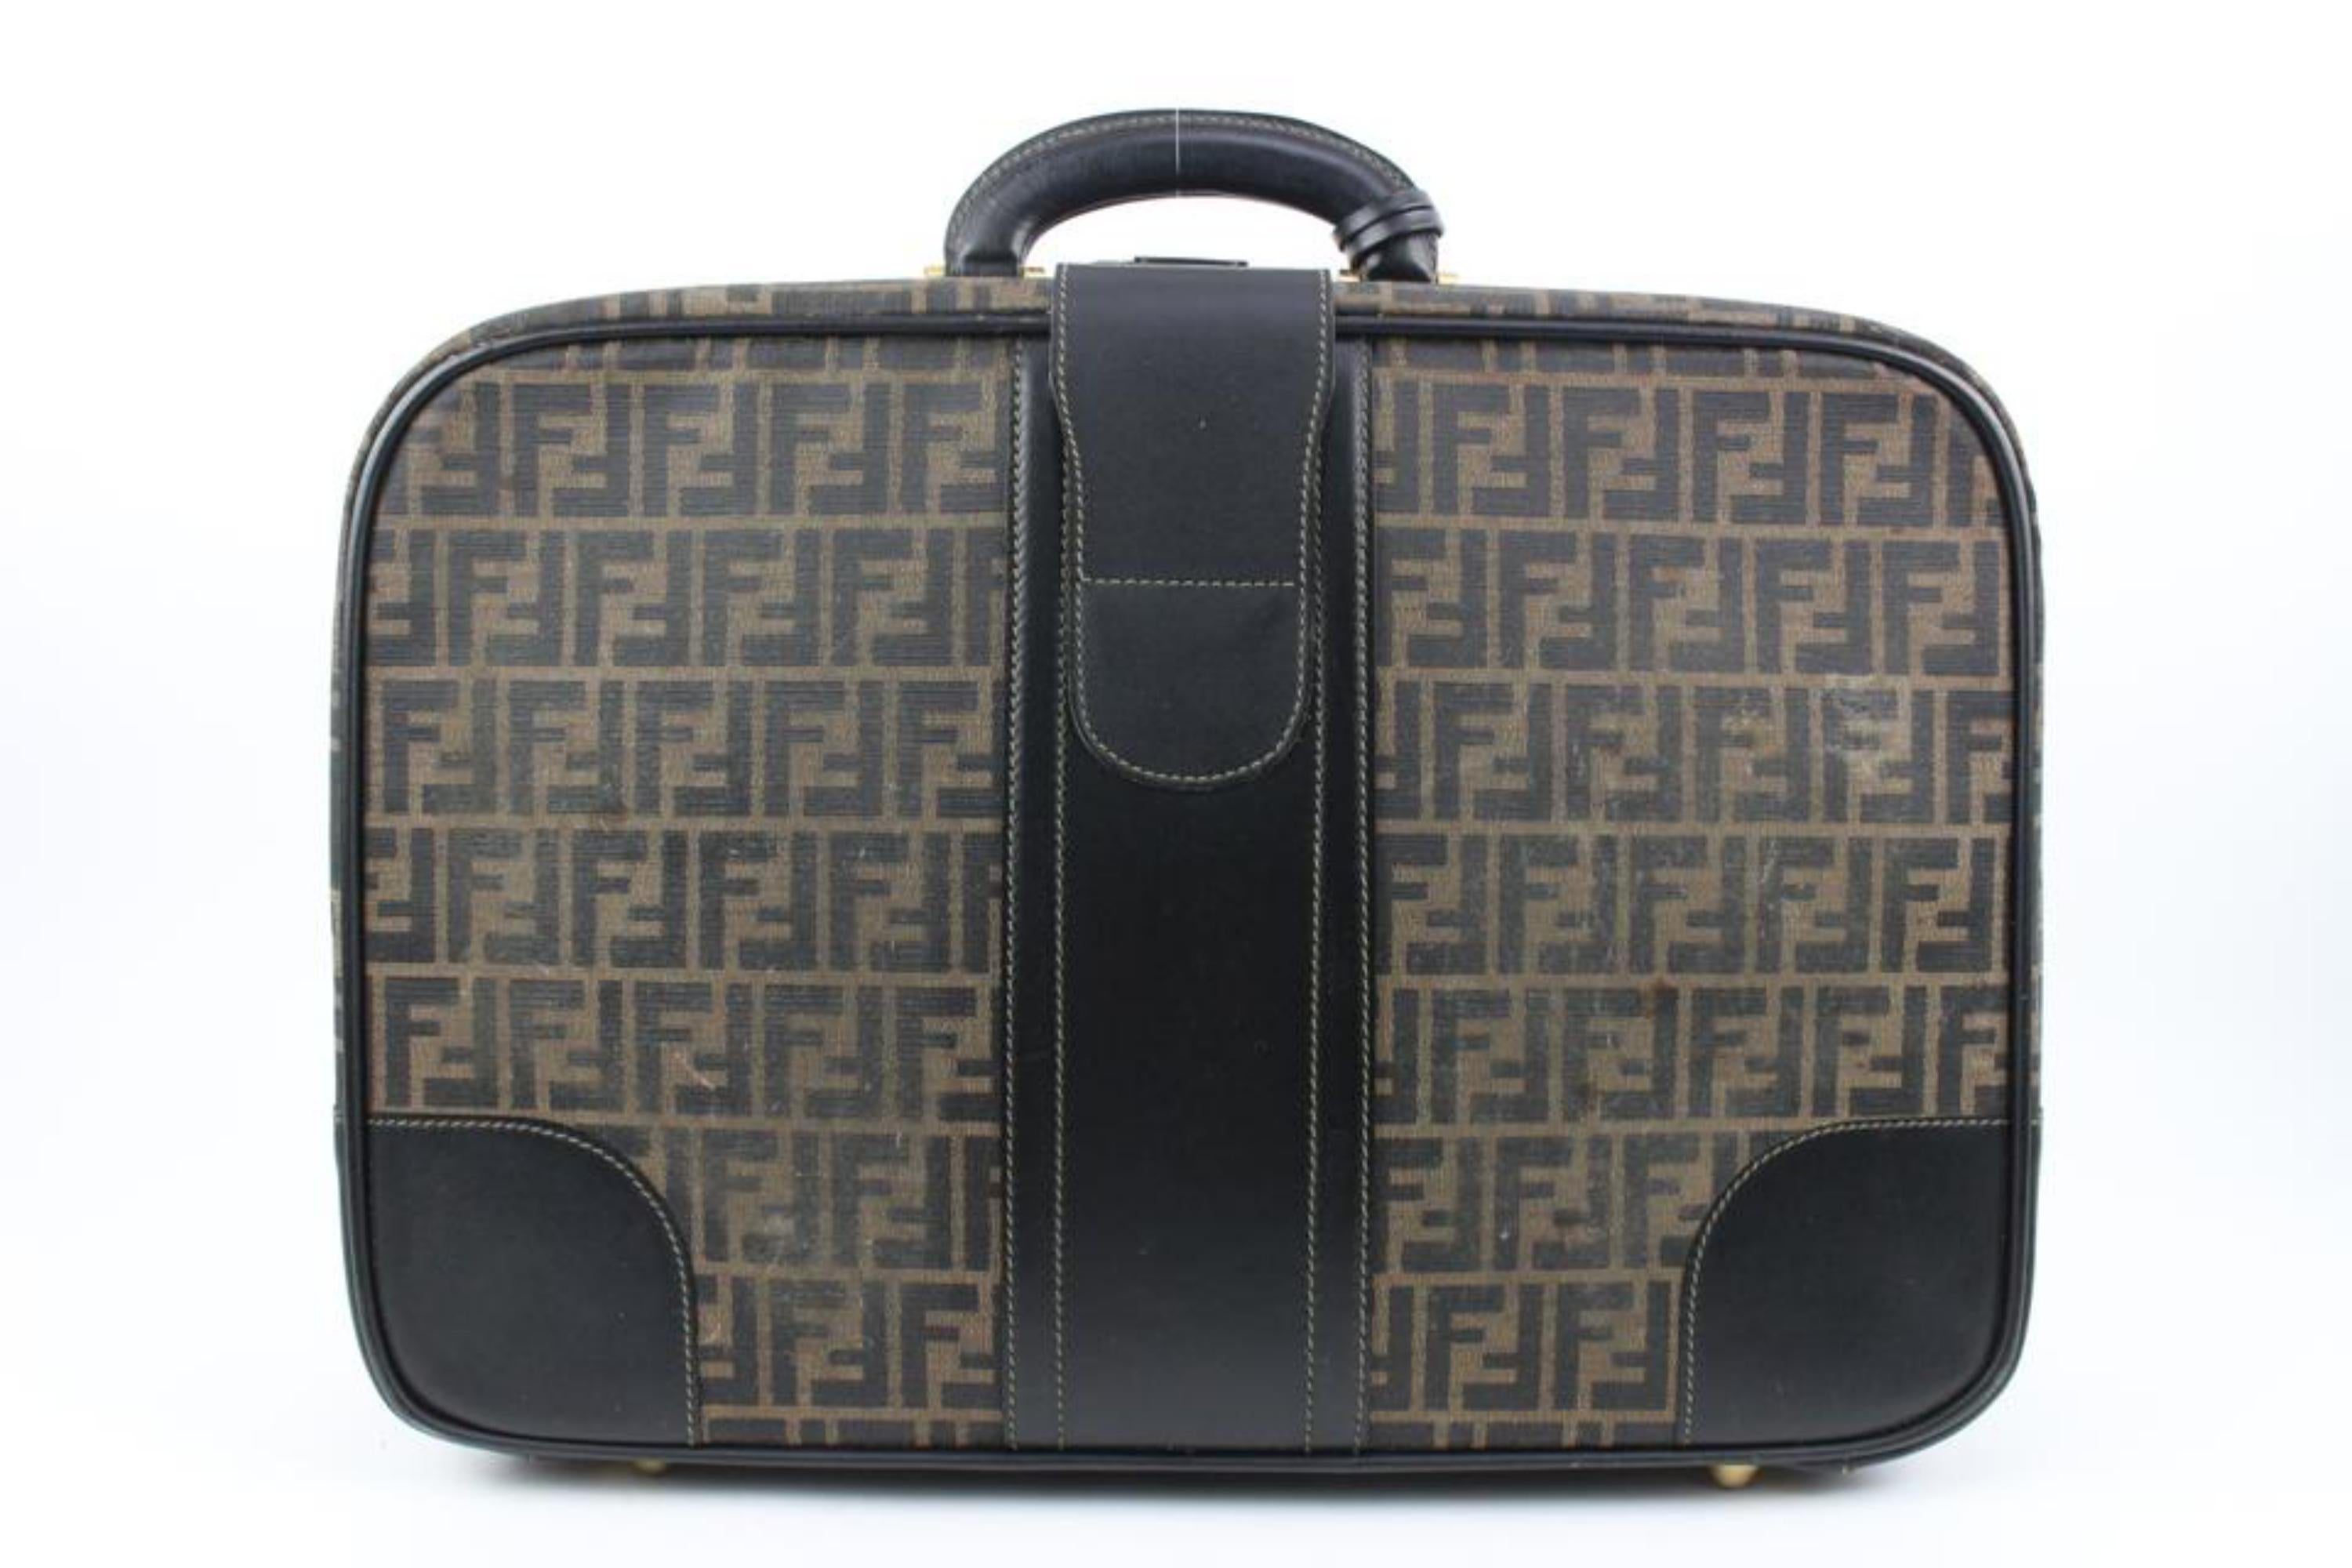 Fendi Brown Monogram FF Zucca Trunk Luggage Suitcase 119f10 In Good Condition For Sale In Dix hills, NY